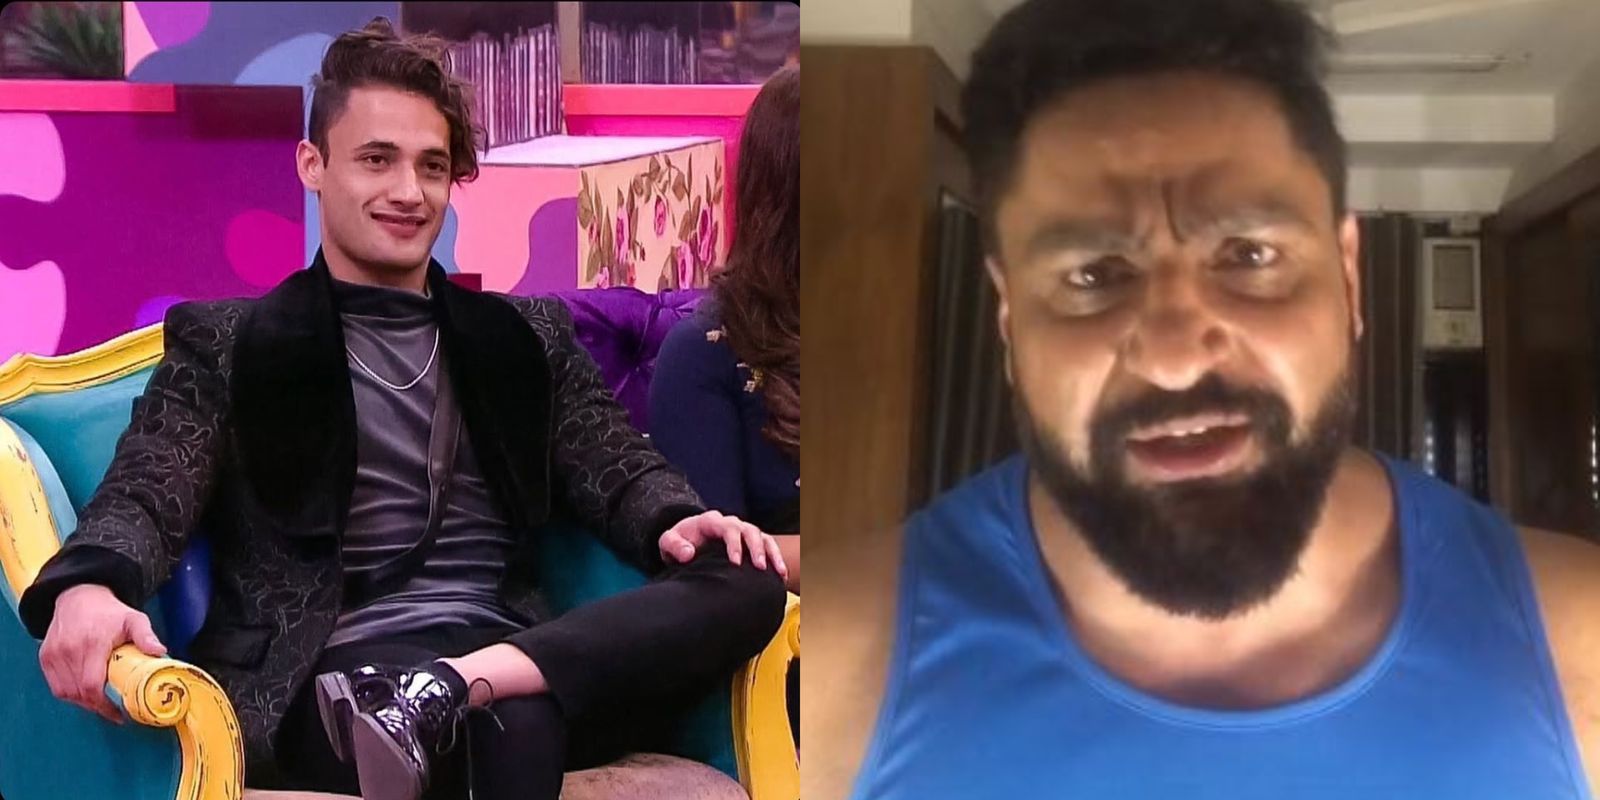 Bigg Boss 13: Parag Tyagi Threatens Asim Riaz After He Calls Him 'Nalla' In A Viral Clip From Show; Says He'll Be Waiting Outside